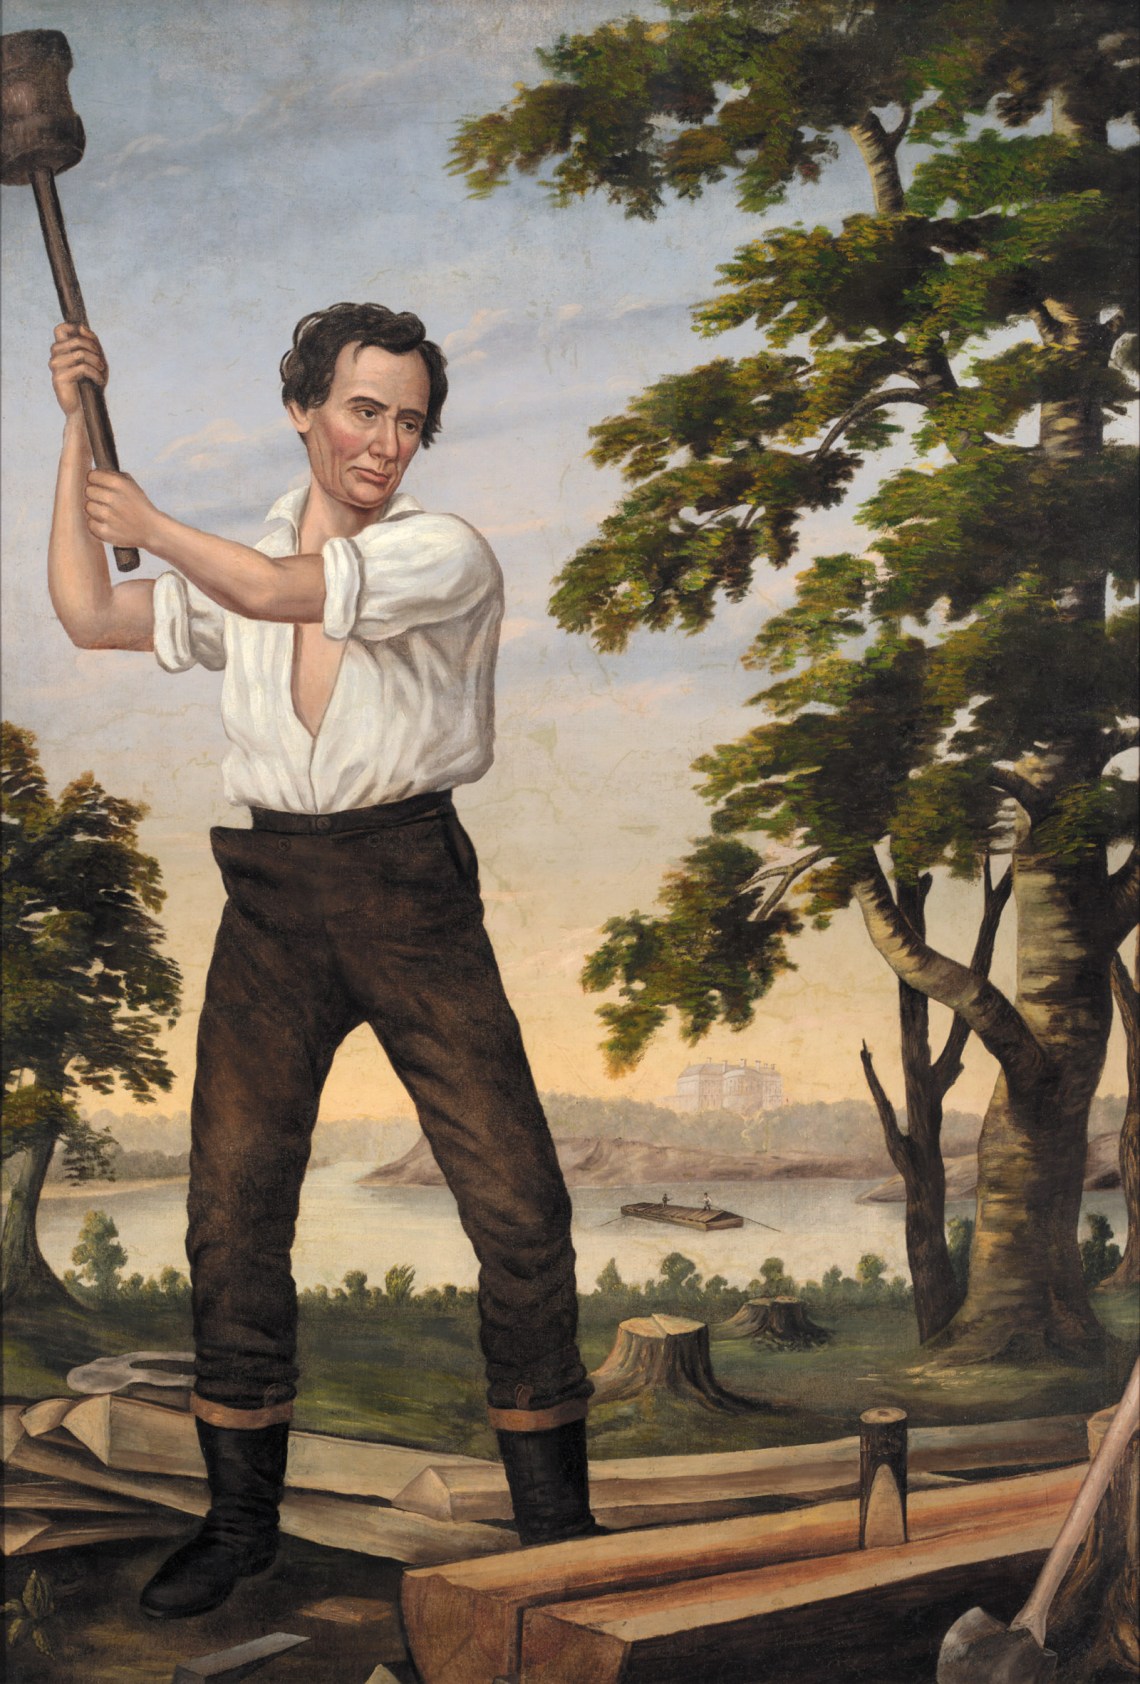 The Railsplitter, a painting of Abraham Lincoln displayed at his rallies